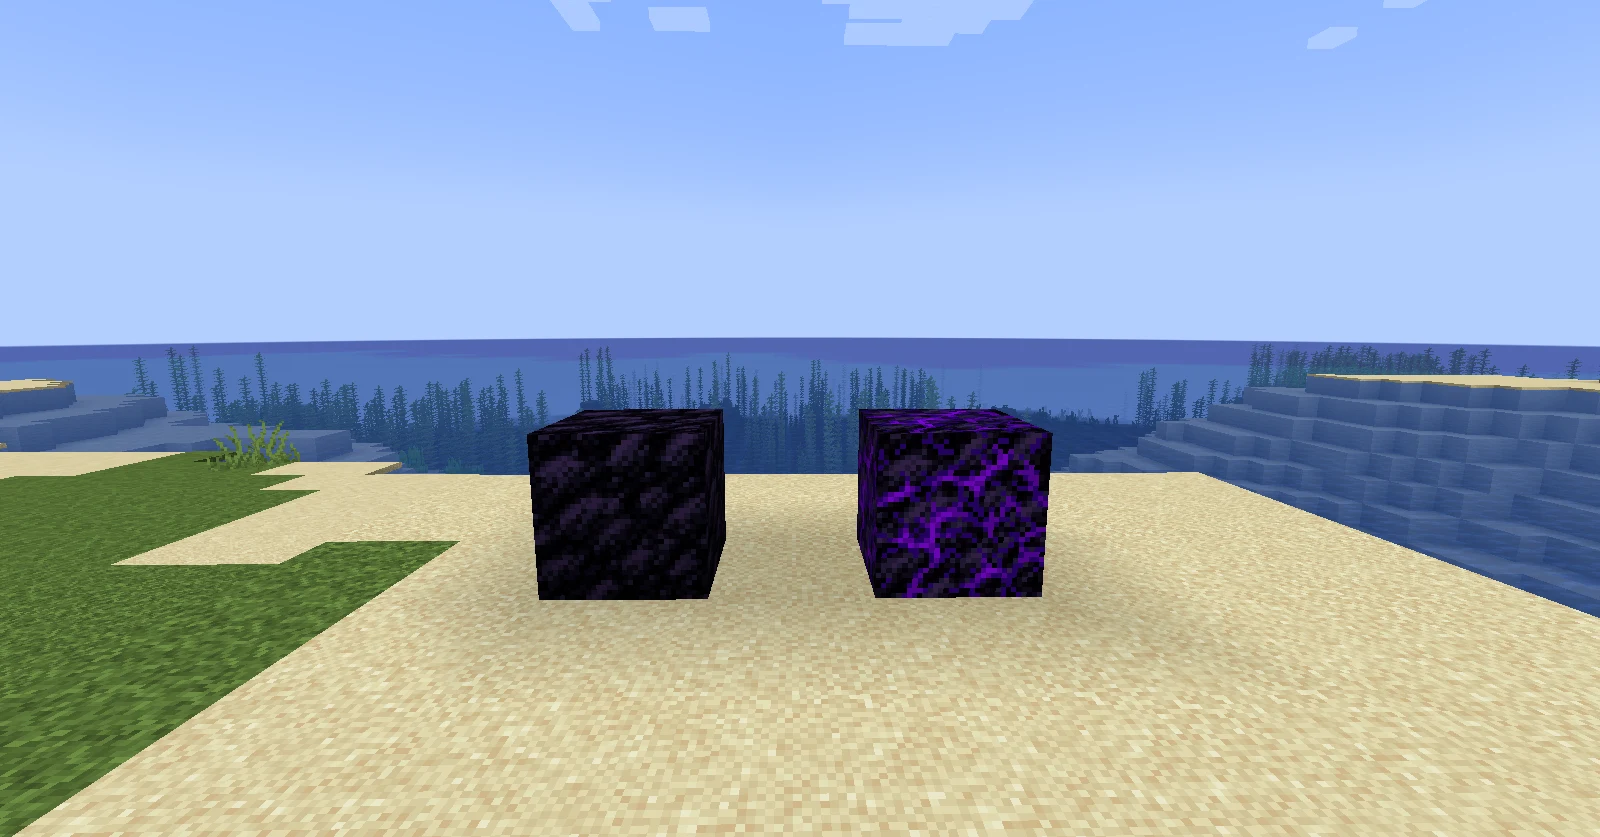 Two different kinds of Minecraft blocks